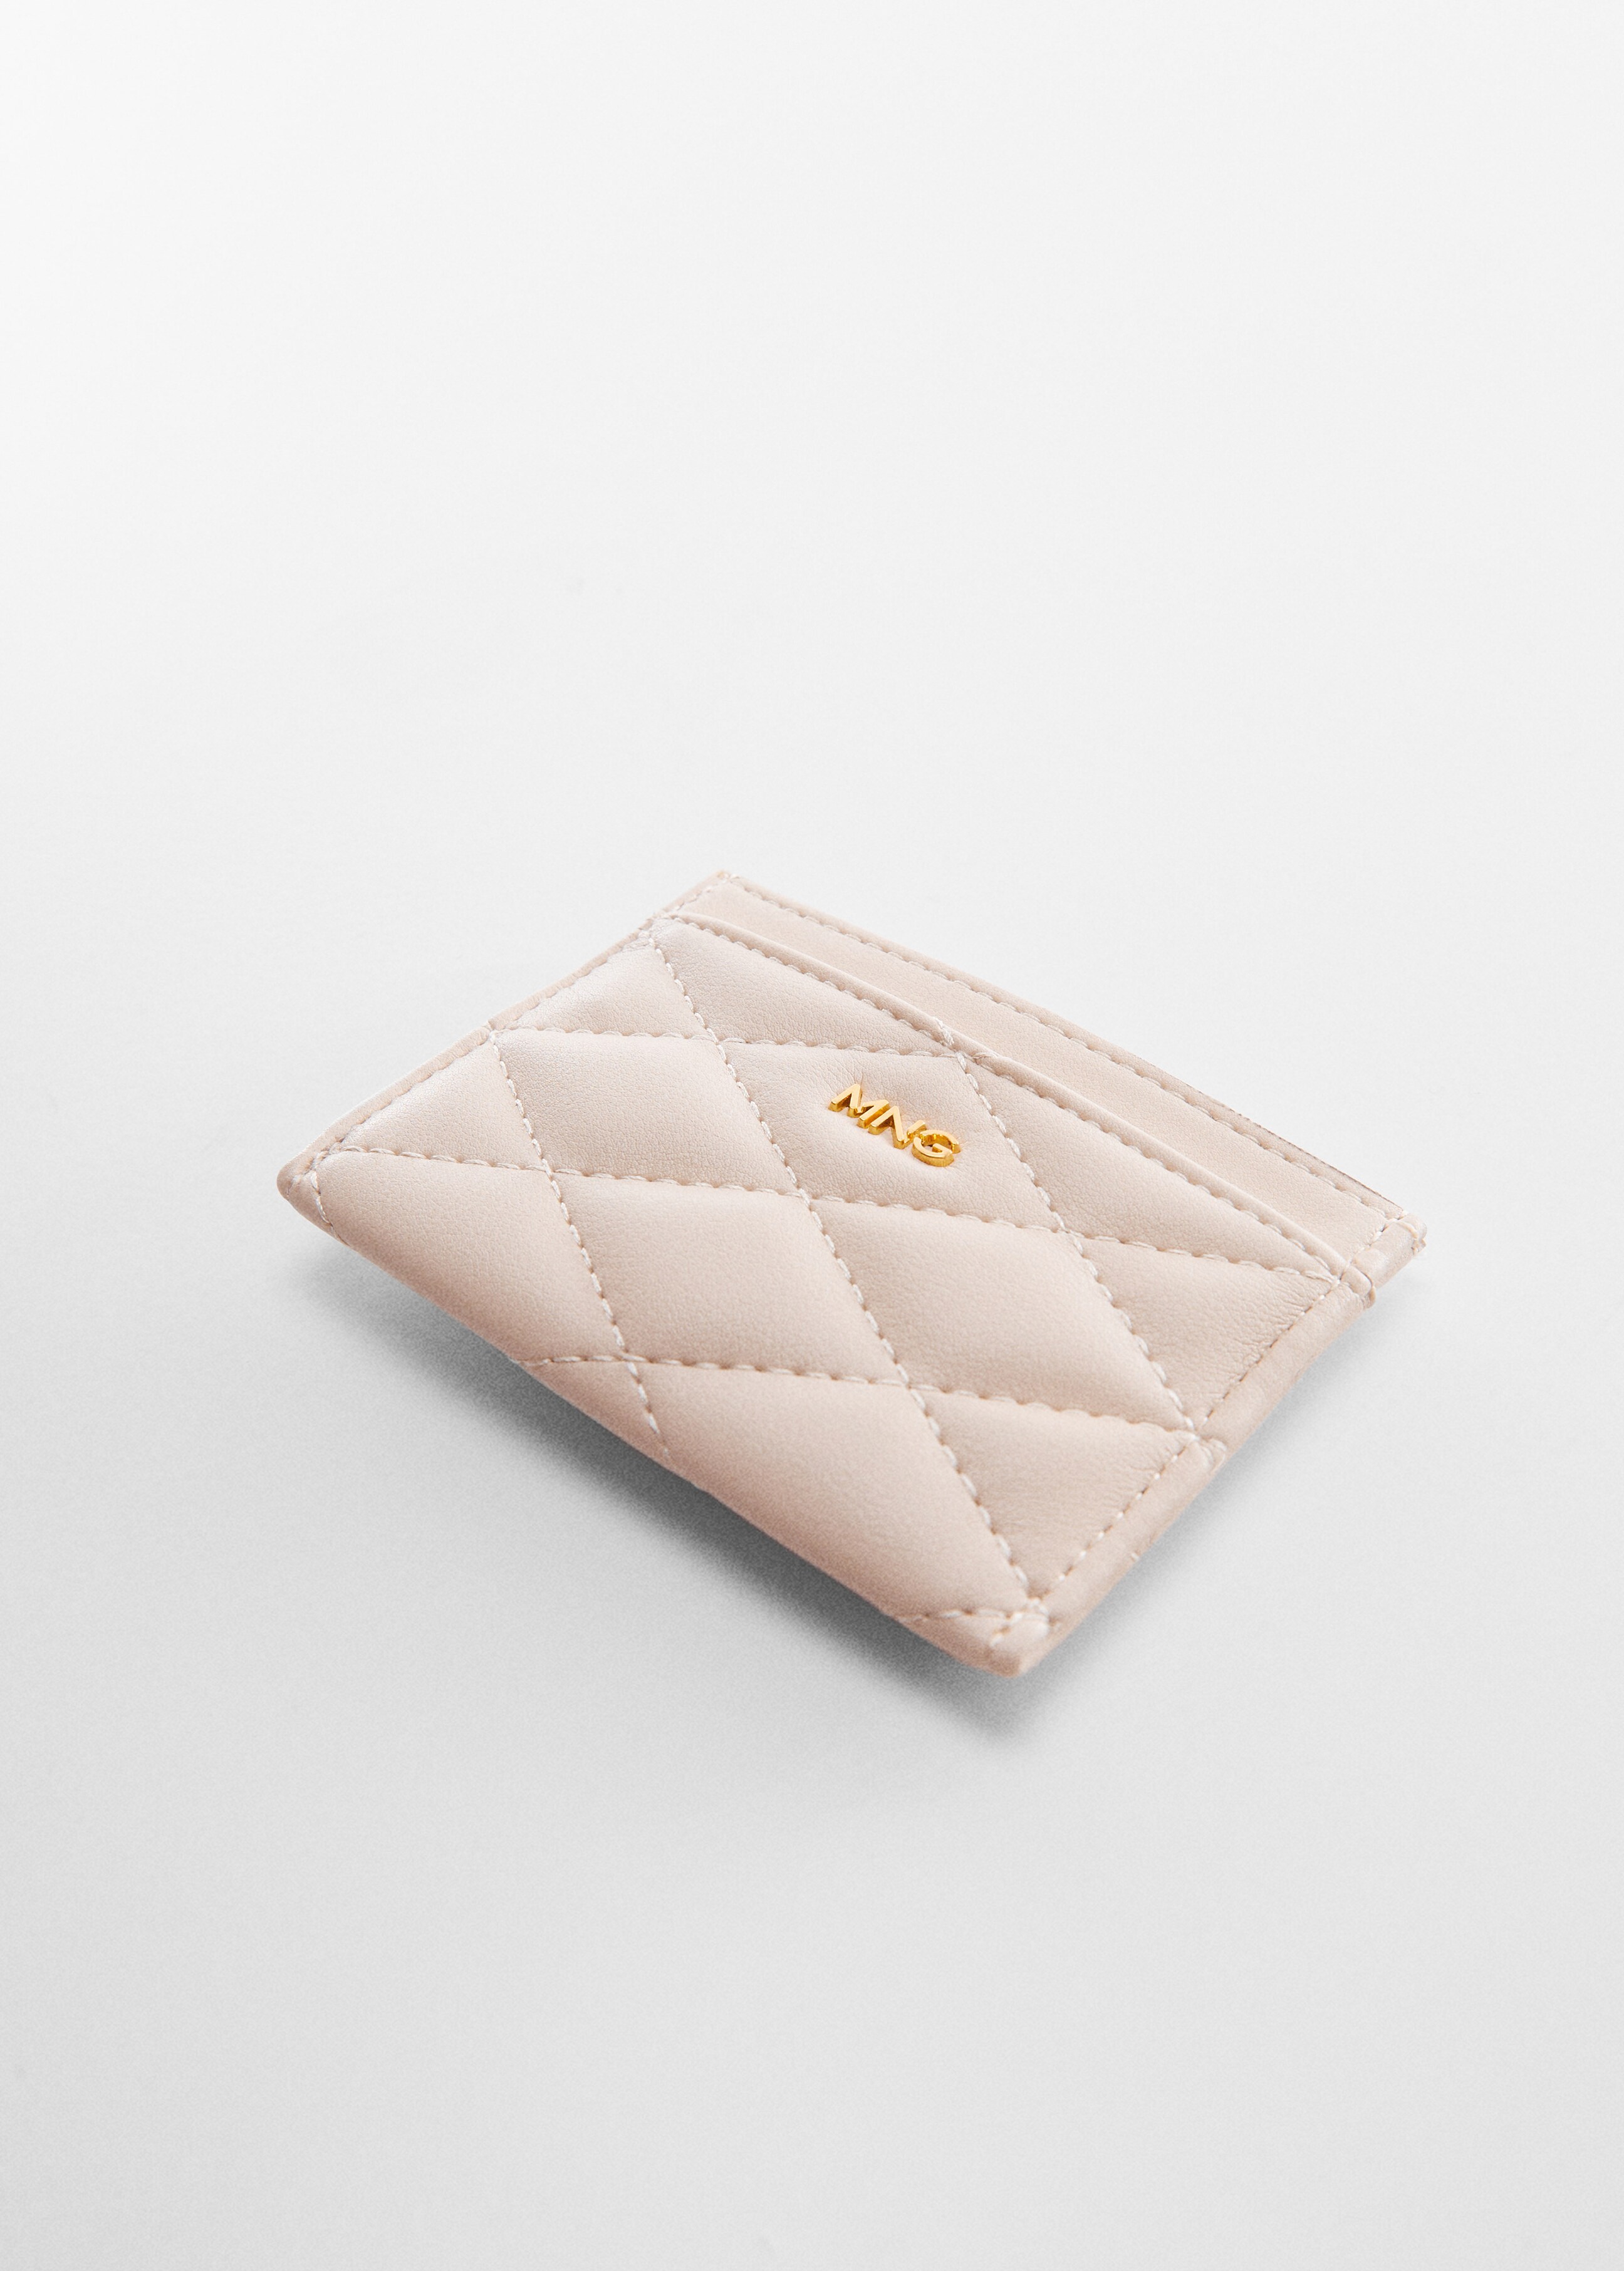 Quilted cardholder with logo - Medium plane